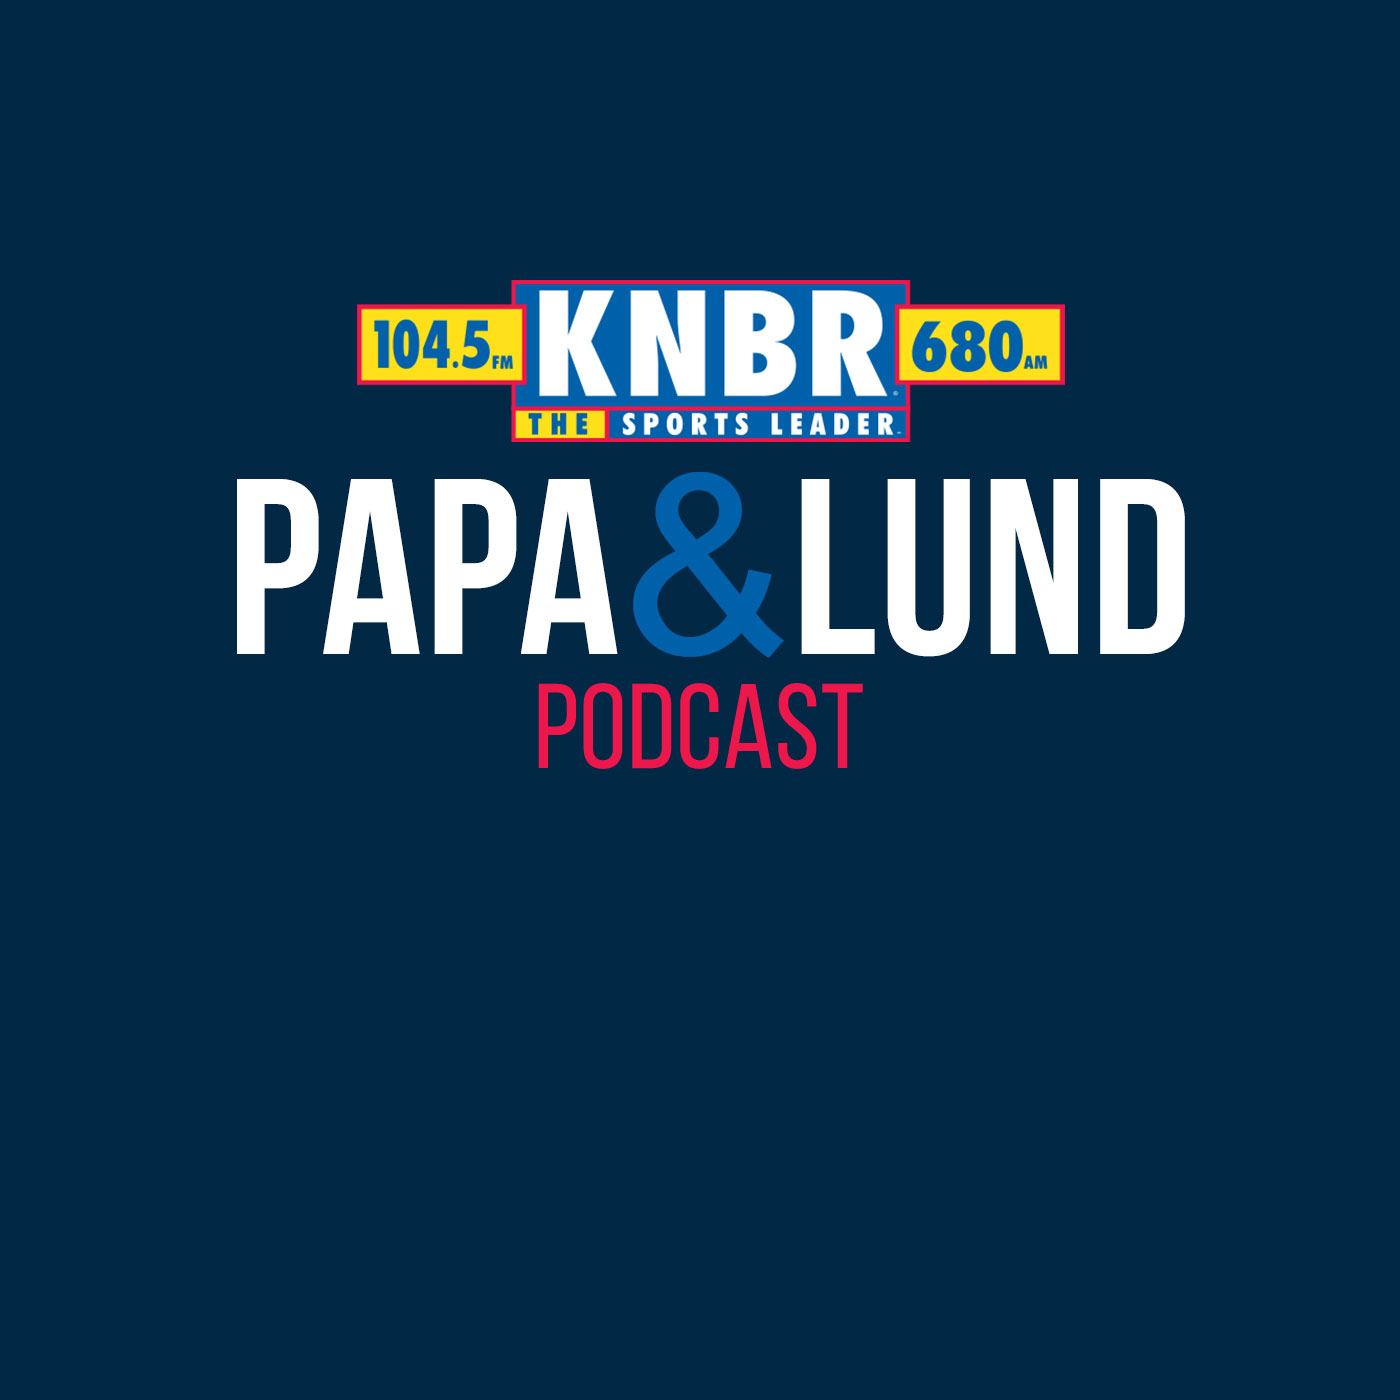 2-2 David Villar joins Papa & Lund to discuss his offseason workouts to always stay ready to do anything the Giants need from him in the 2023 season